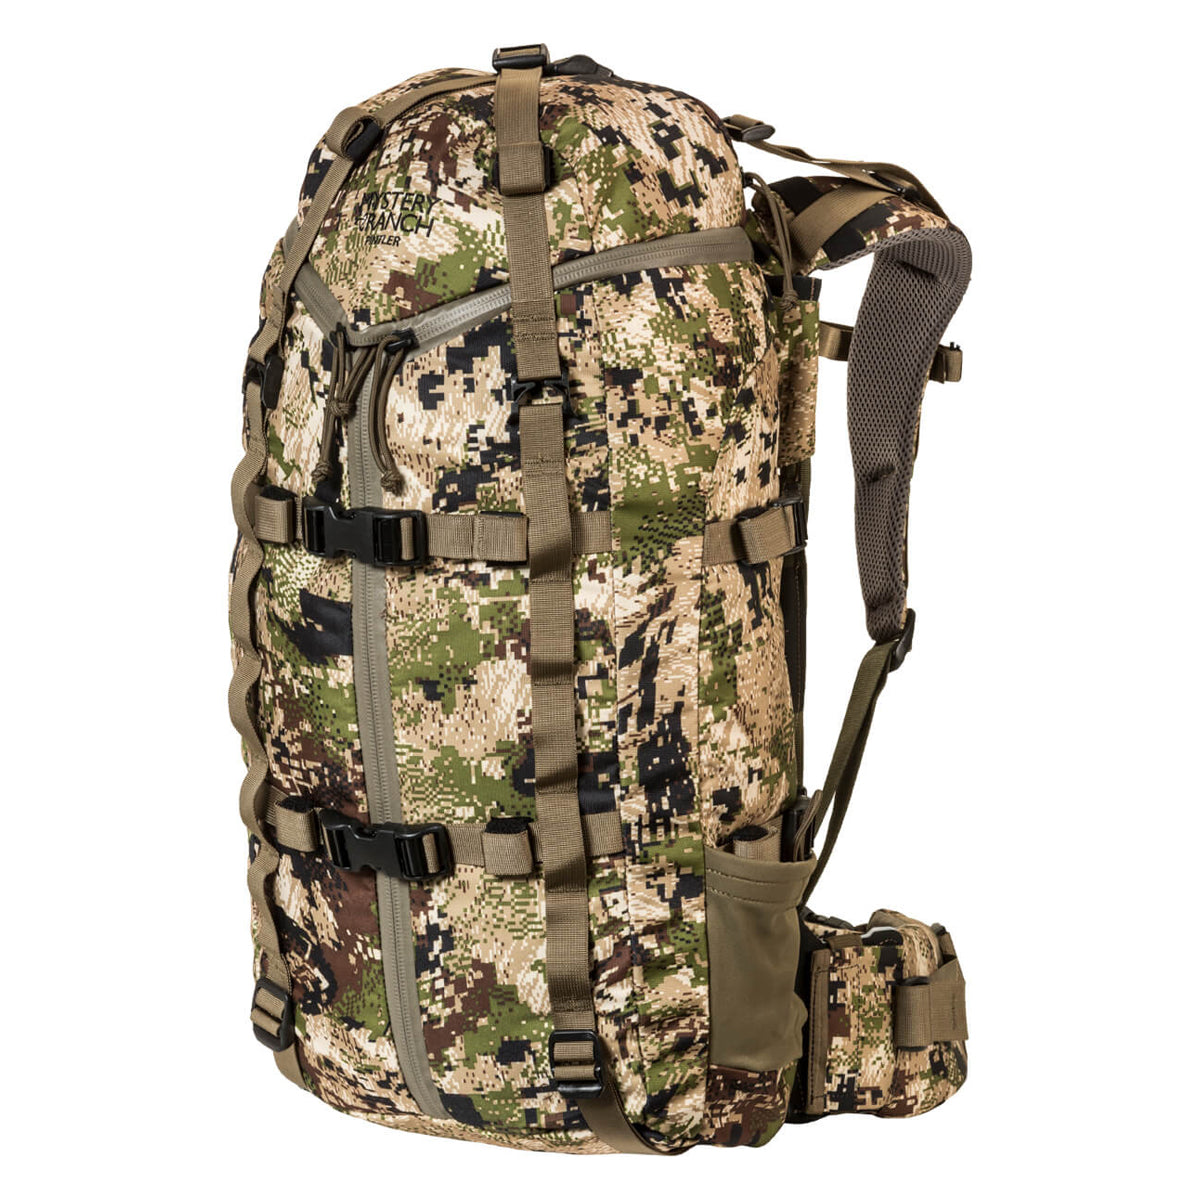 Mystery Ranch Pintler Backpack (2019) in Mystery Ranch Pintler Backpack (2019) - goHUNT Shop by GOHUNT | Mystery Ranch - GOHUNT Shop